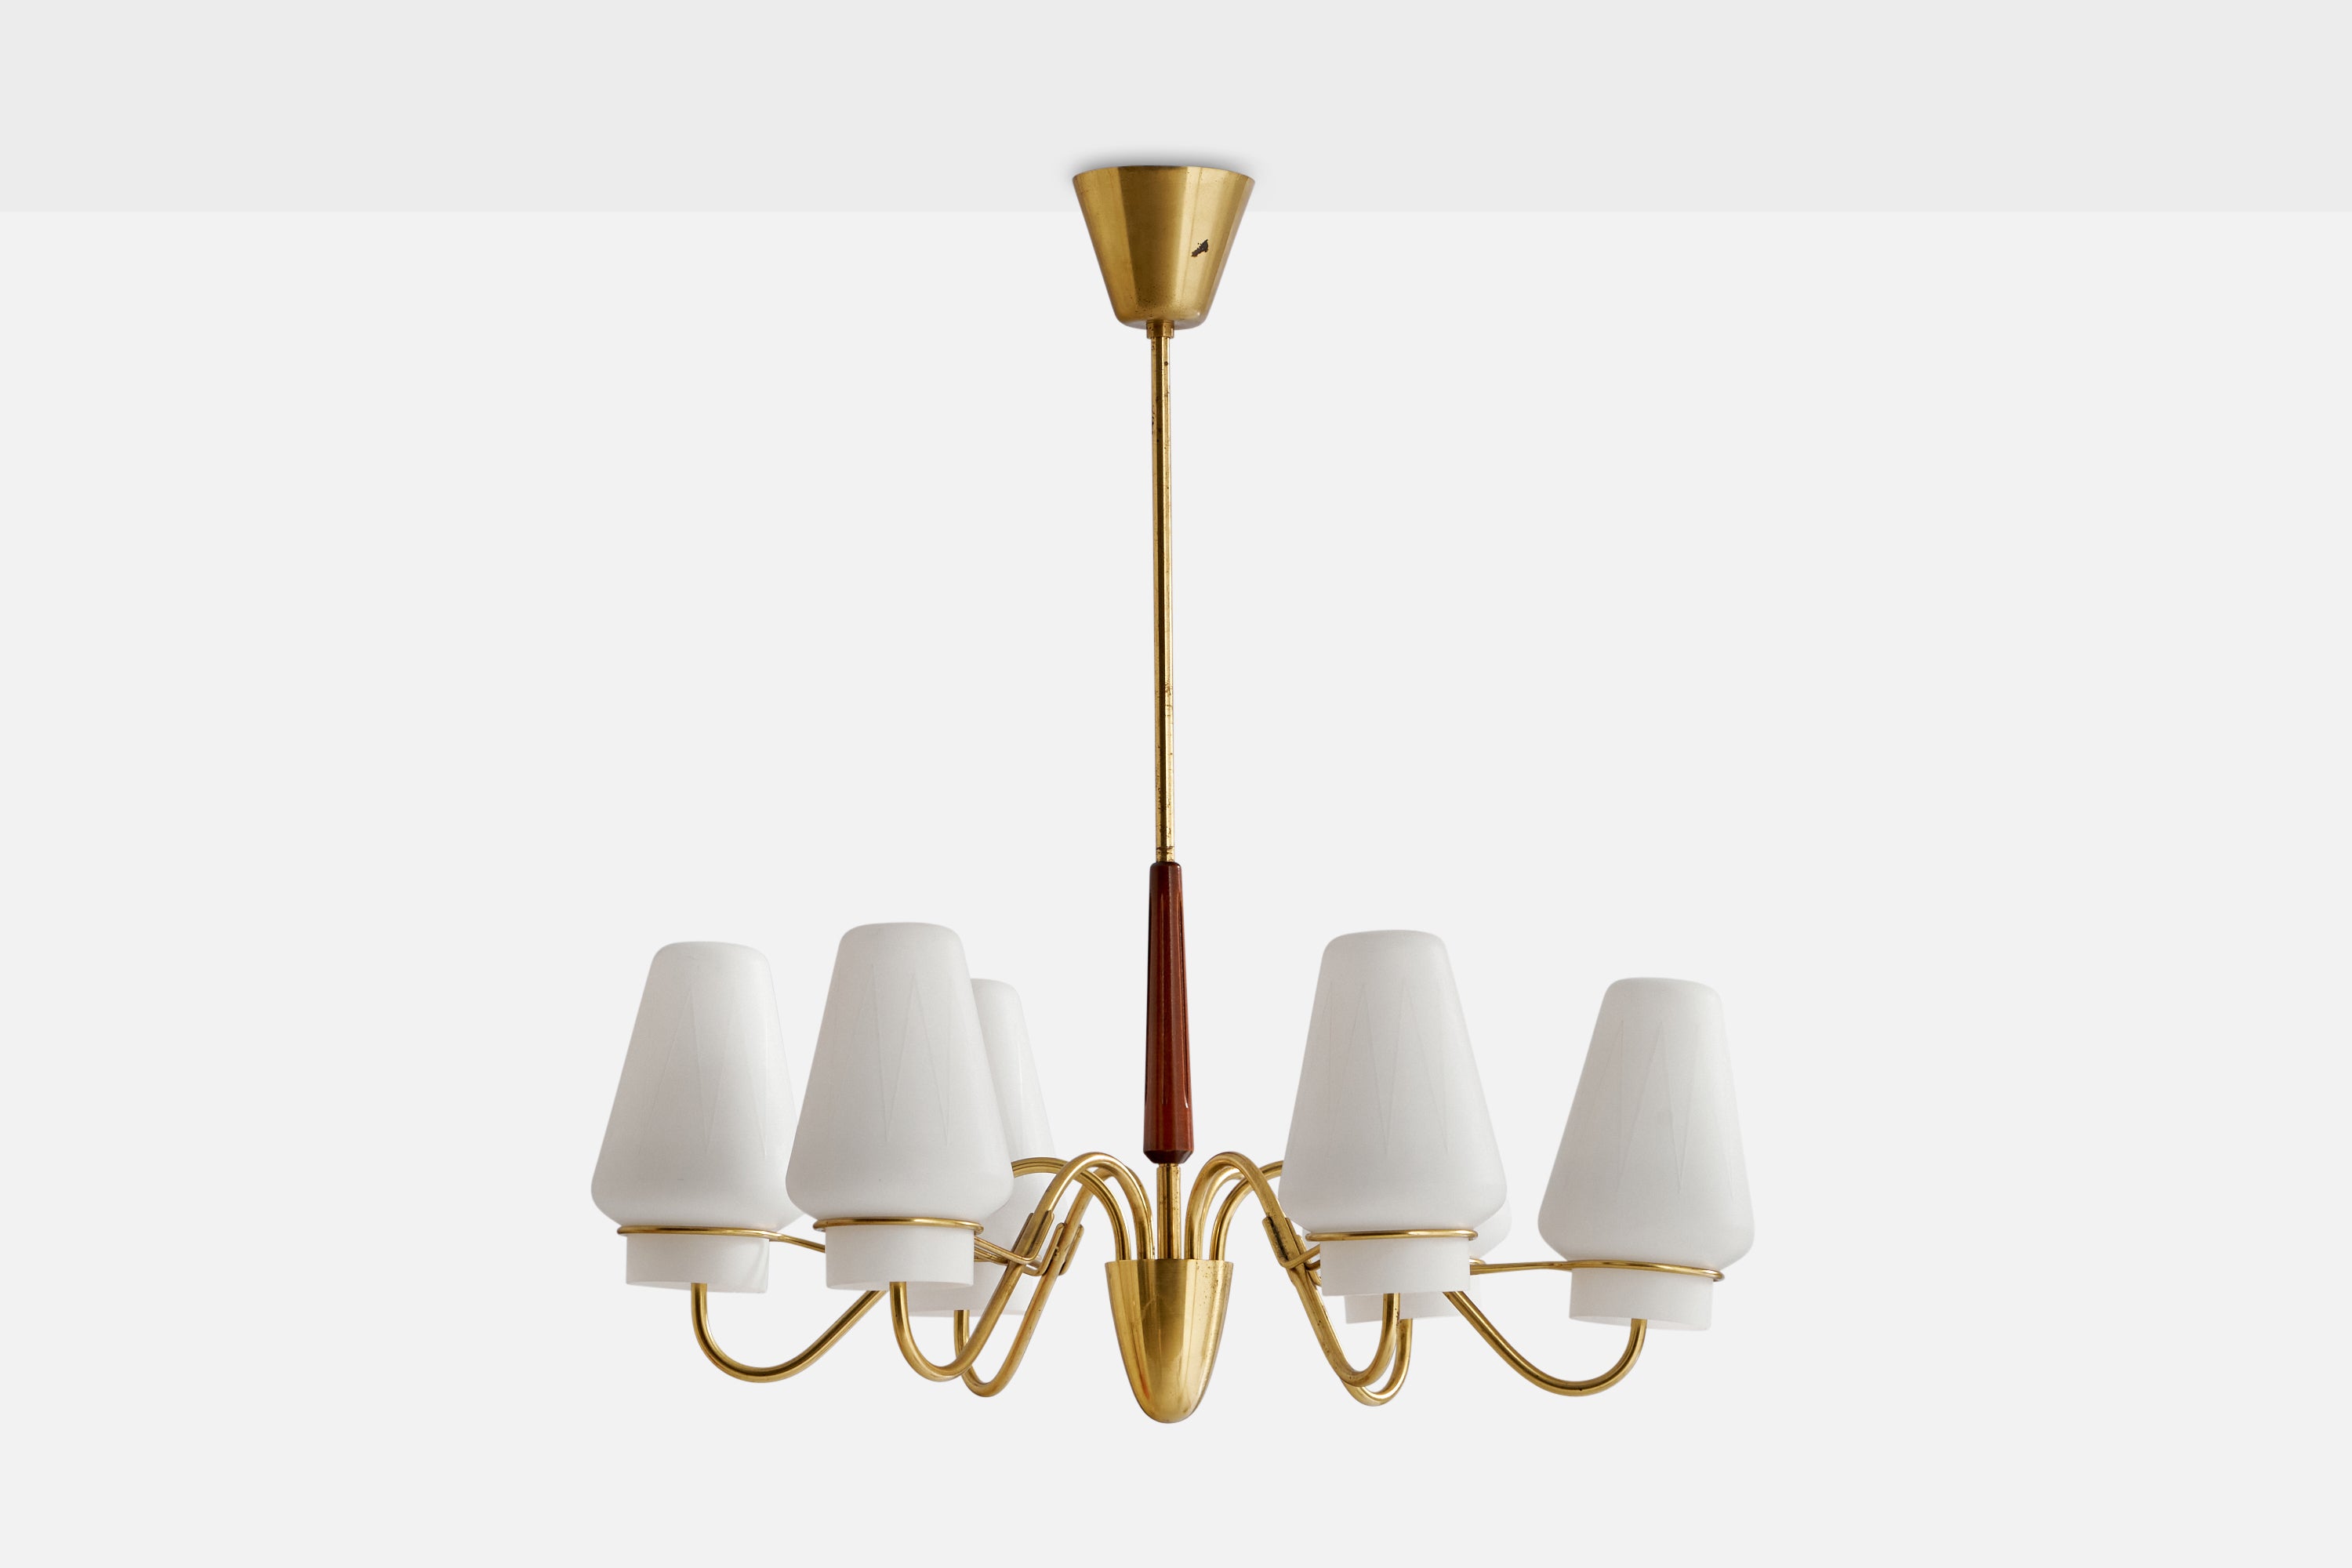 A brass, mahogany and opaline glass chandelier designed and produced in Sweden, c. 1940s.

Dimensions of canopy (inches): 3” H x 3.52” Diameter
Socket takes standard E-26 bulbs. 6 sockets.There is no maximum wattage stated on the fixture. All